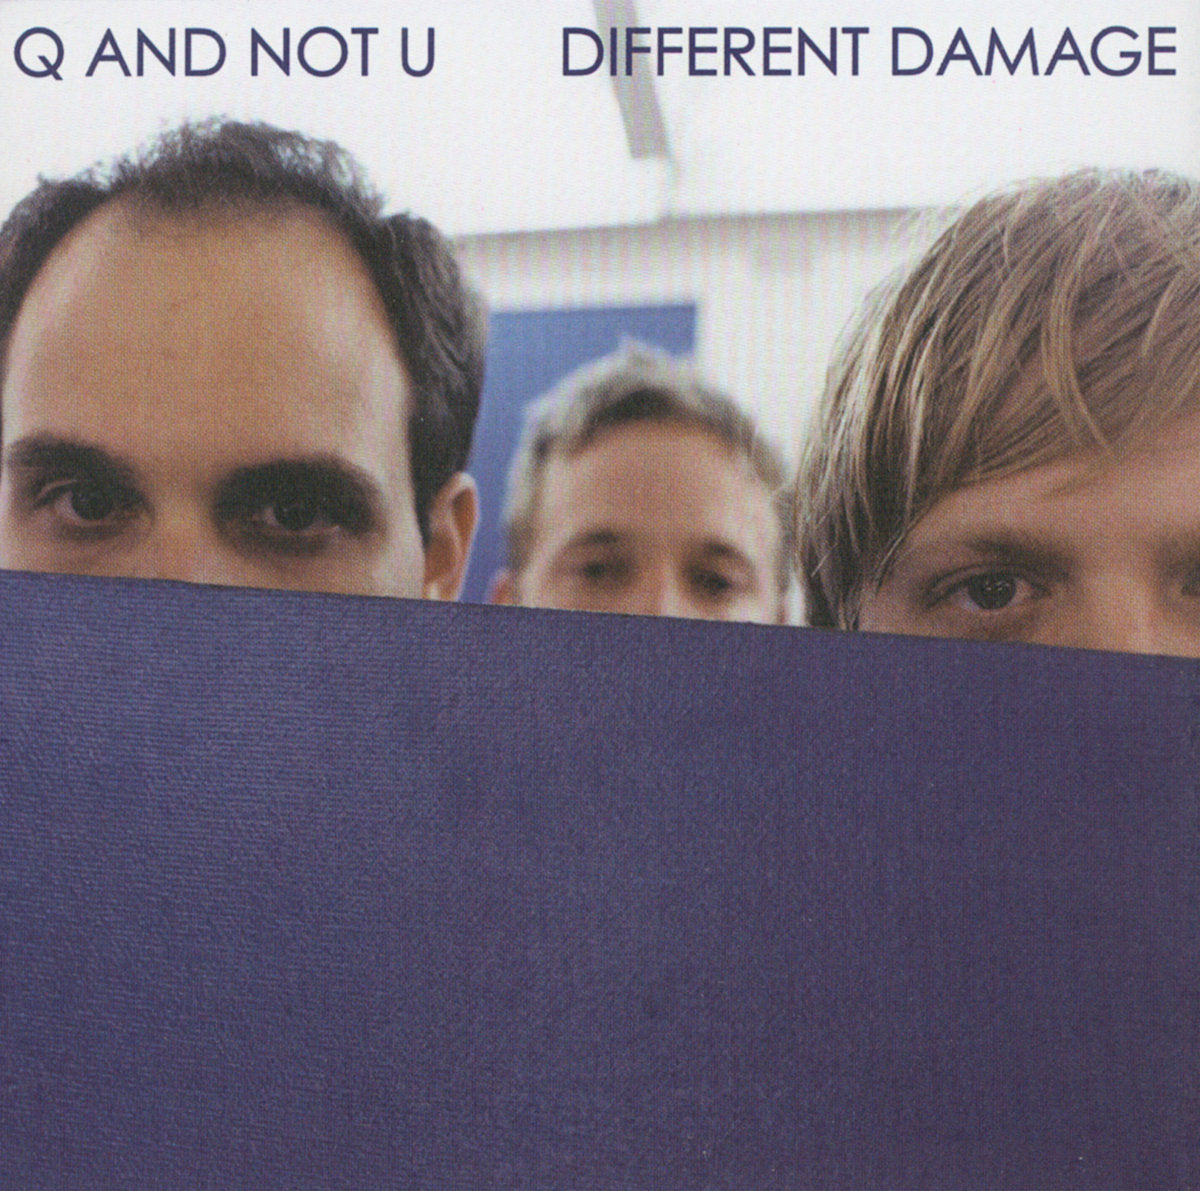 Q And Not U "Different Damage" LP